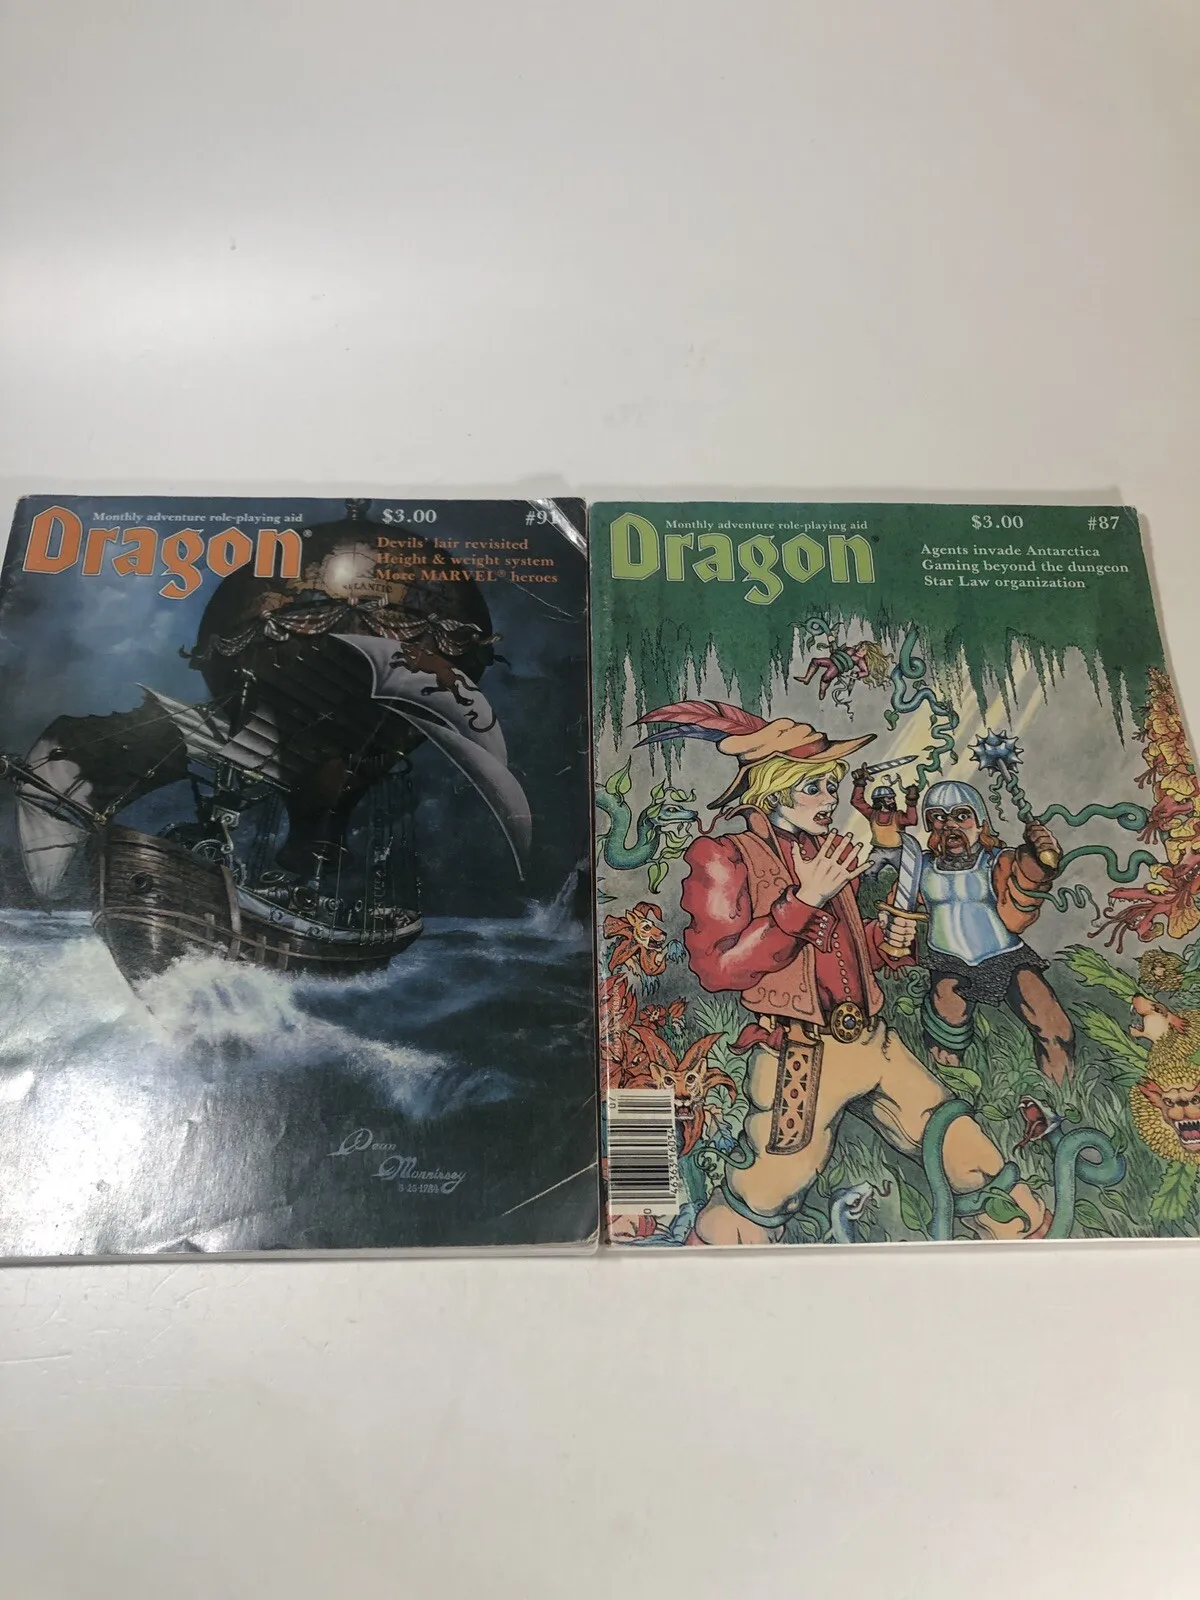 2 Issues, D&d Dragon Magazine Monthly Adventure Role-playing Aid #87 & 91 1984